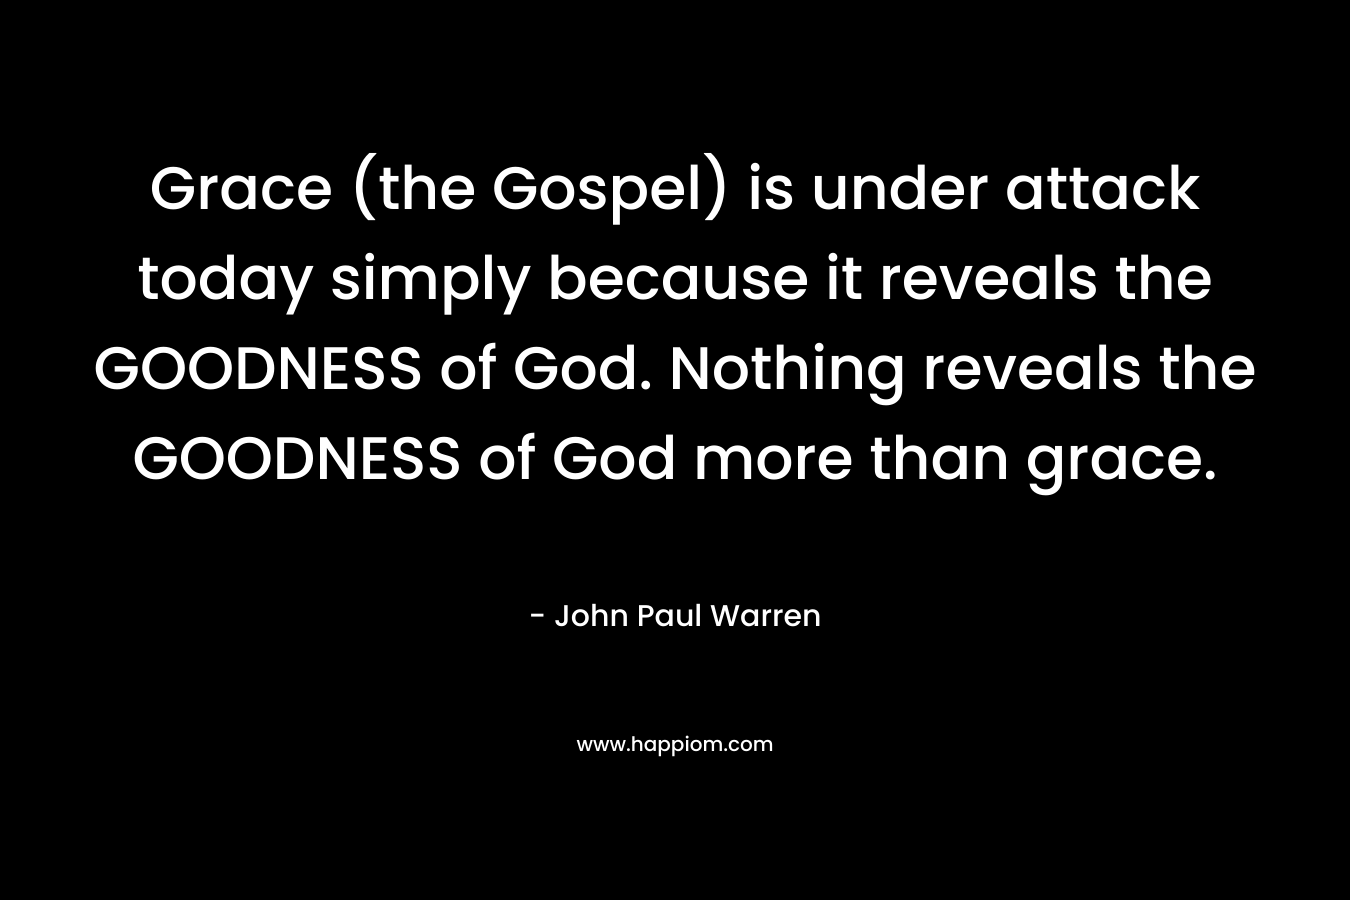 Grace (the Gospel) is under attack today simply because it reveals the GOODNESS of God. Nothing reveals the GOODNESS of God more than grace.